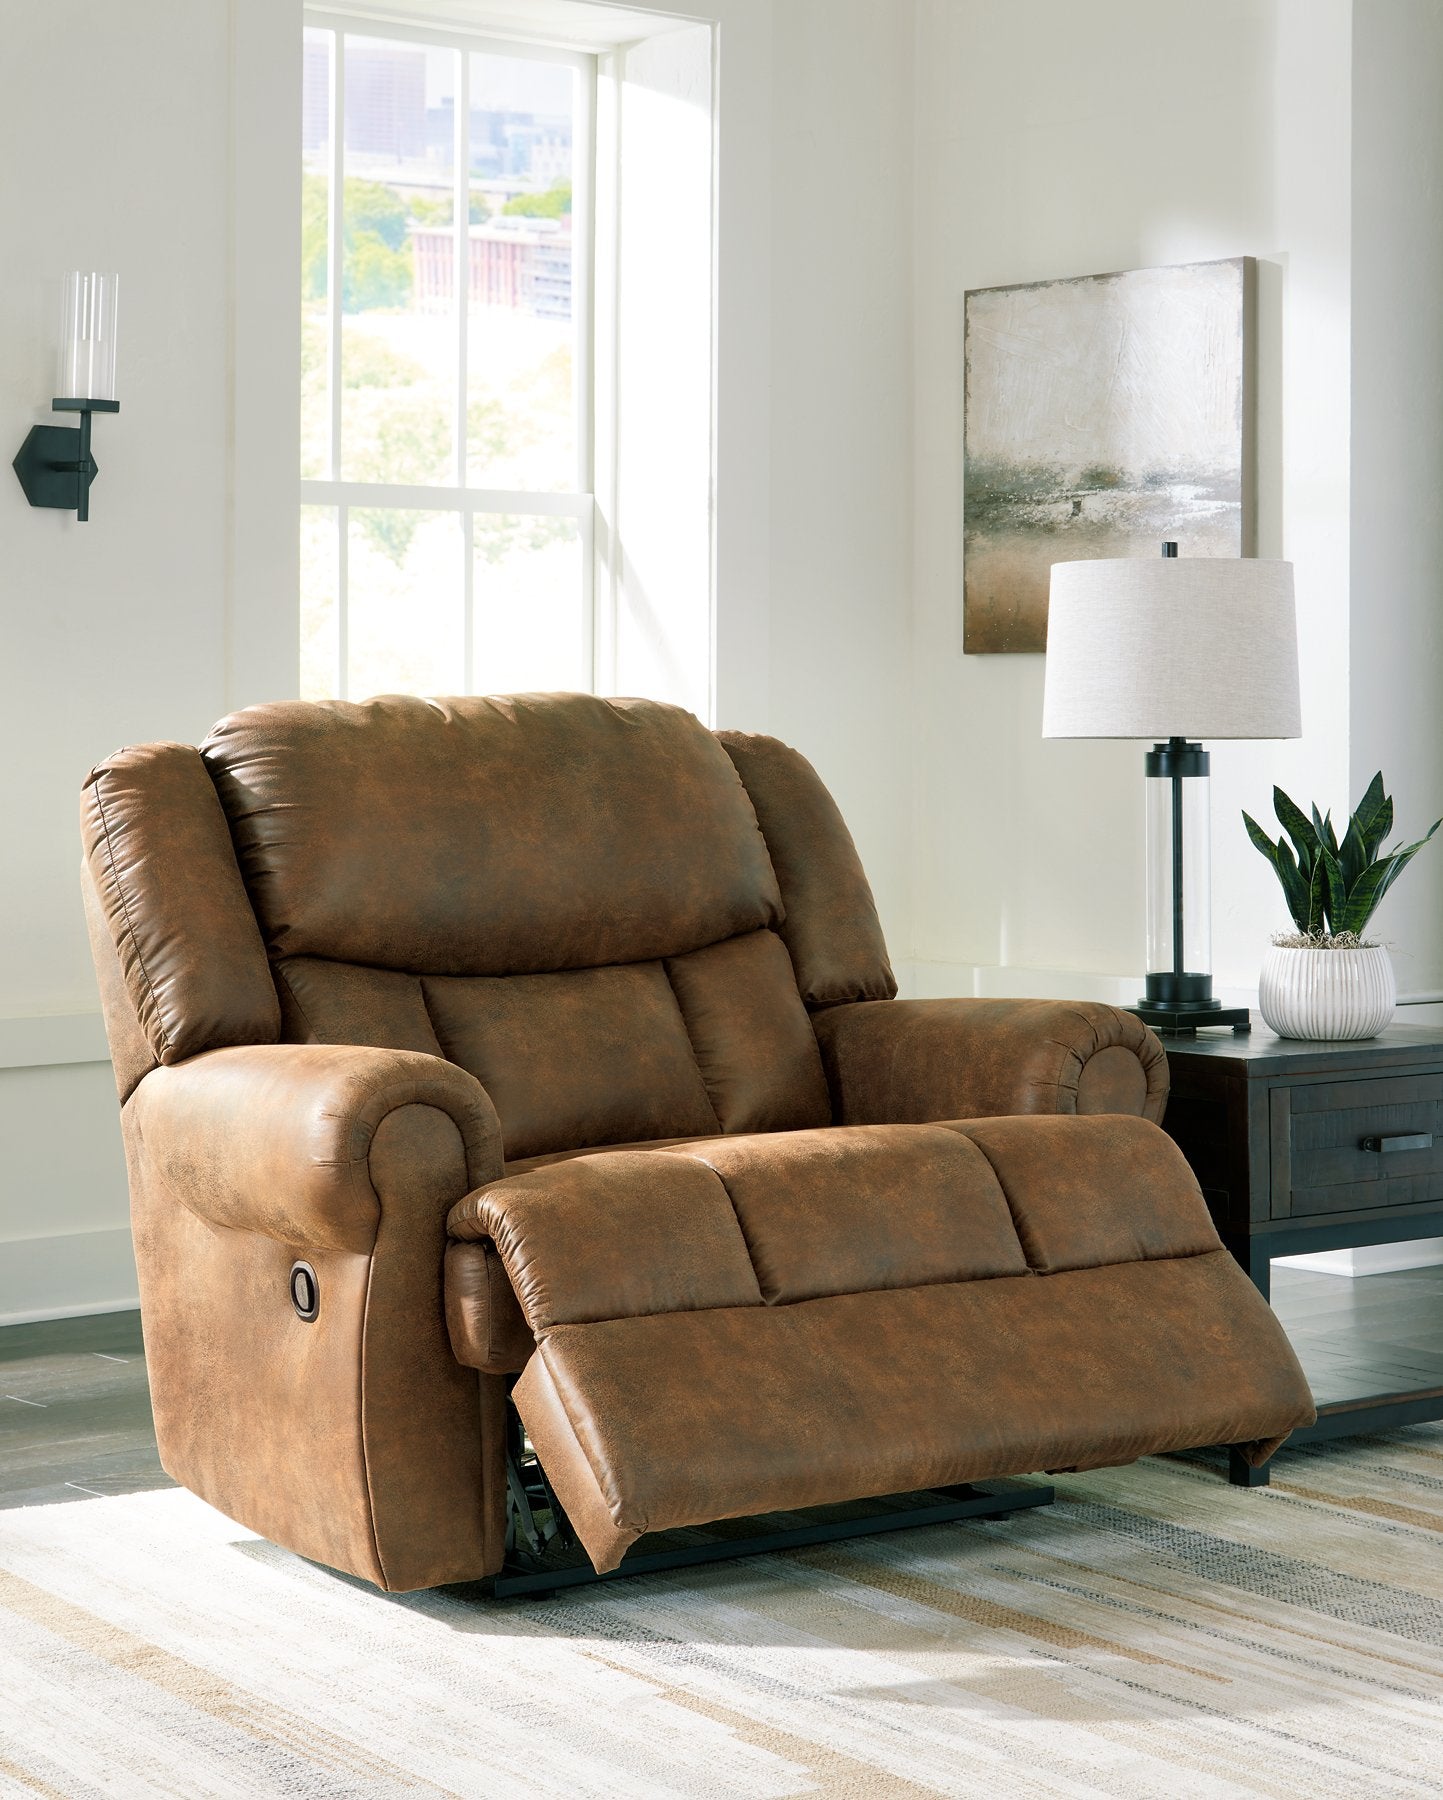 Boothbay Oversized Recliner - Half Price Furniture